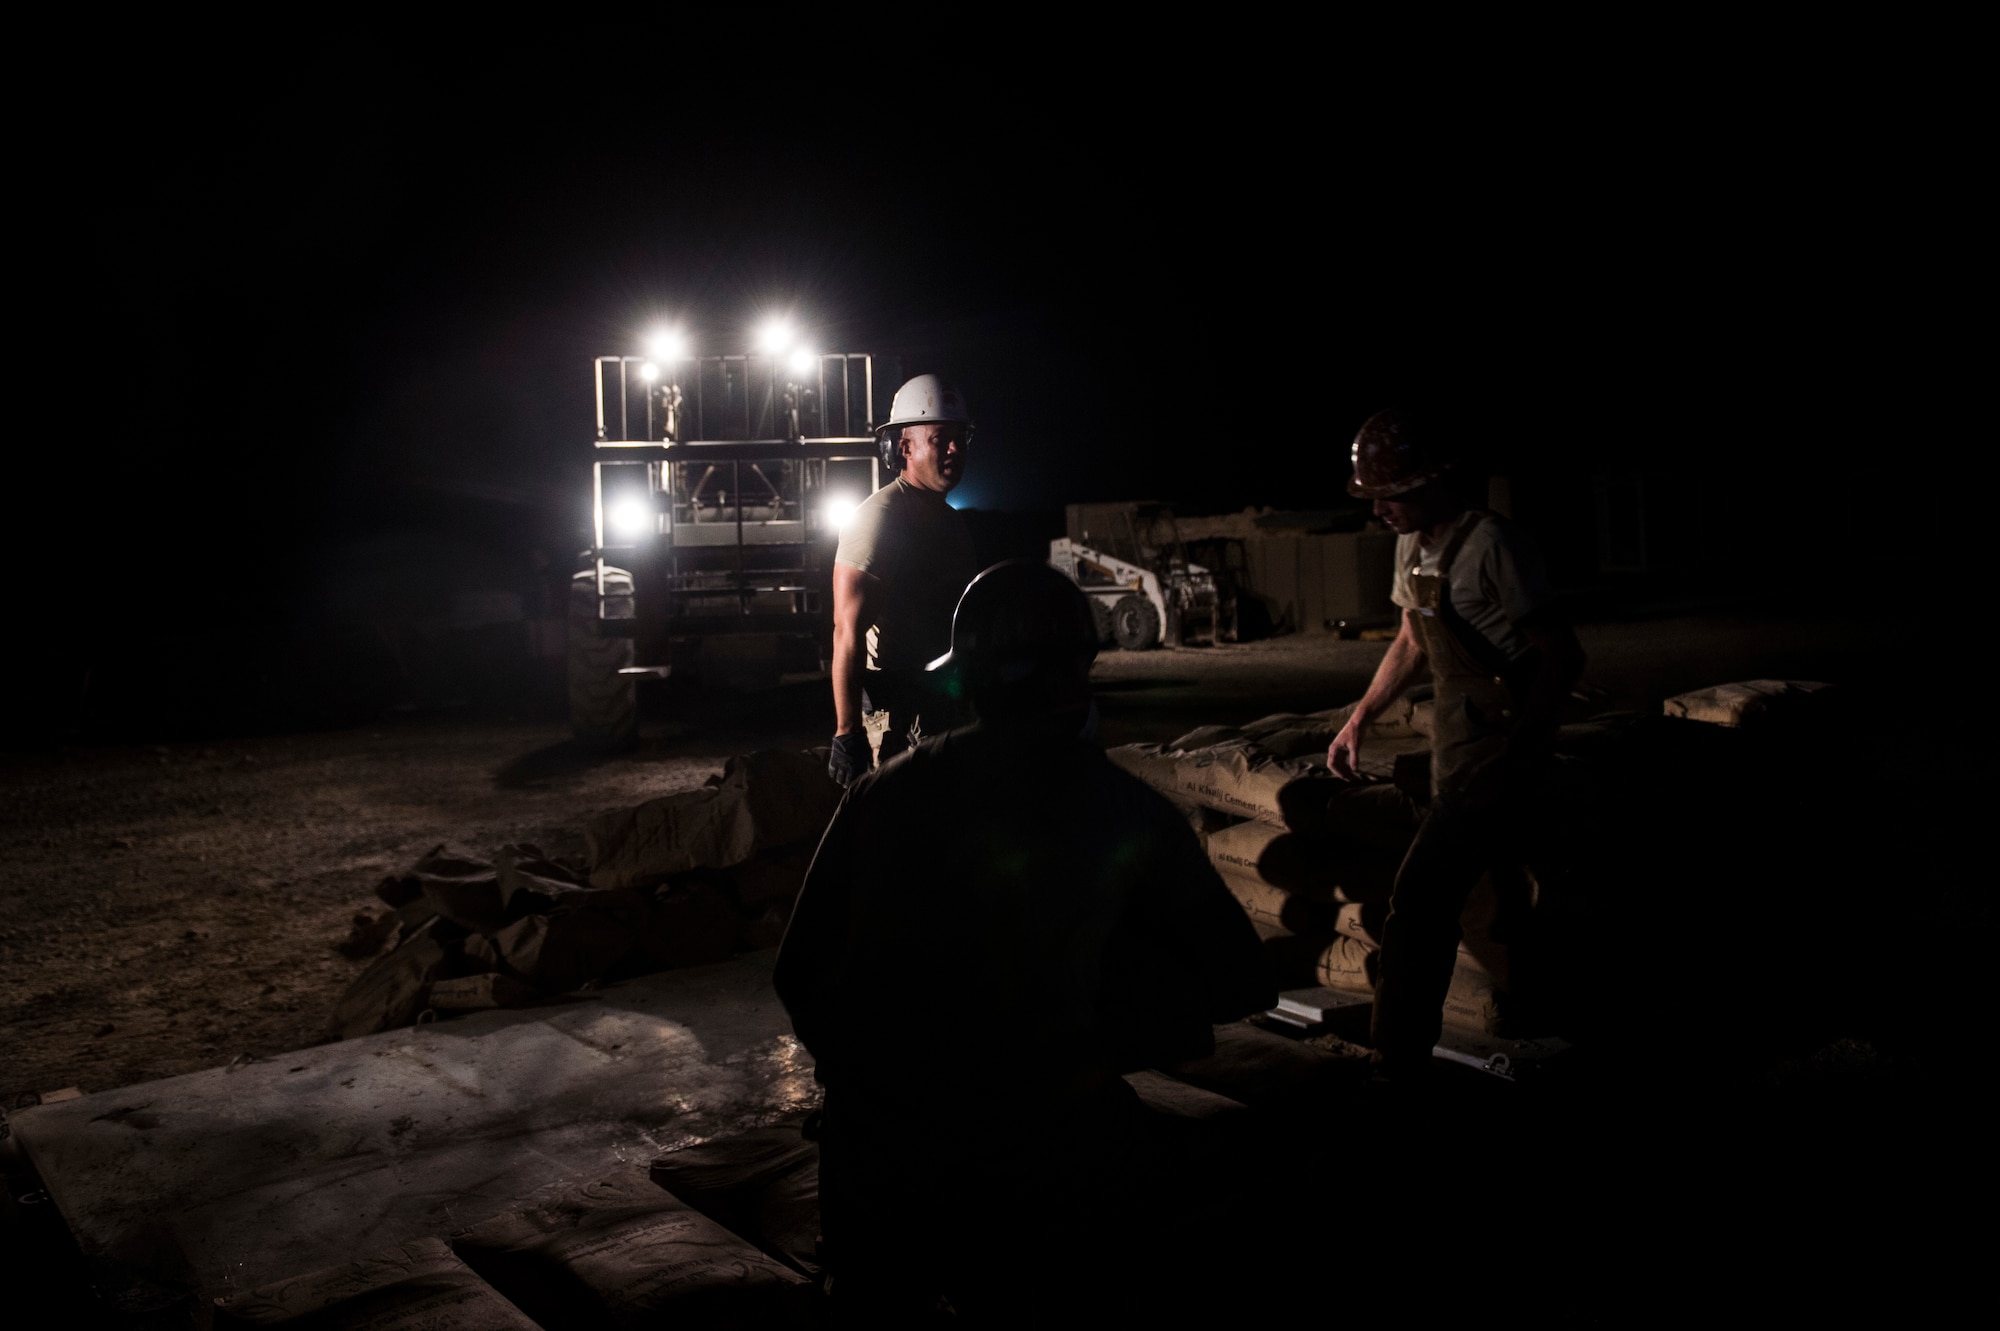 Tech. Sgt. Jason Caceres, 557th Expeditionary Red Horse Squadron well drilling NCOIC, provides instruction before loading more packages of cement onto the pallet at Al Taqaddum Air Base, Iraq, June 3, 2016. The 557th ERHS well drilling team are obtaining an organic water source for Al Taqaddum. Red Horse is helping to improve Iraq's infrastructure in support of the Government of Iraq.
(U.S. Air Force photo/Staff Sgt. Larry E. Reid Jr., Released)